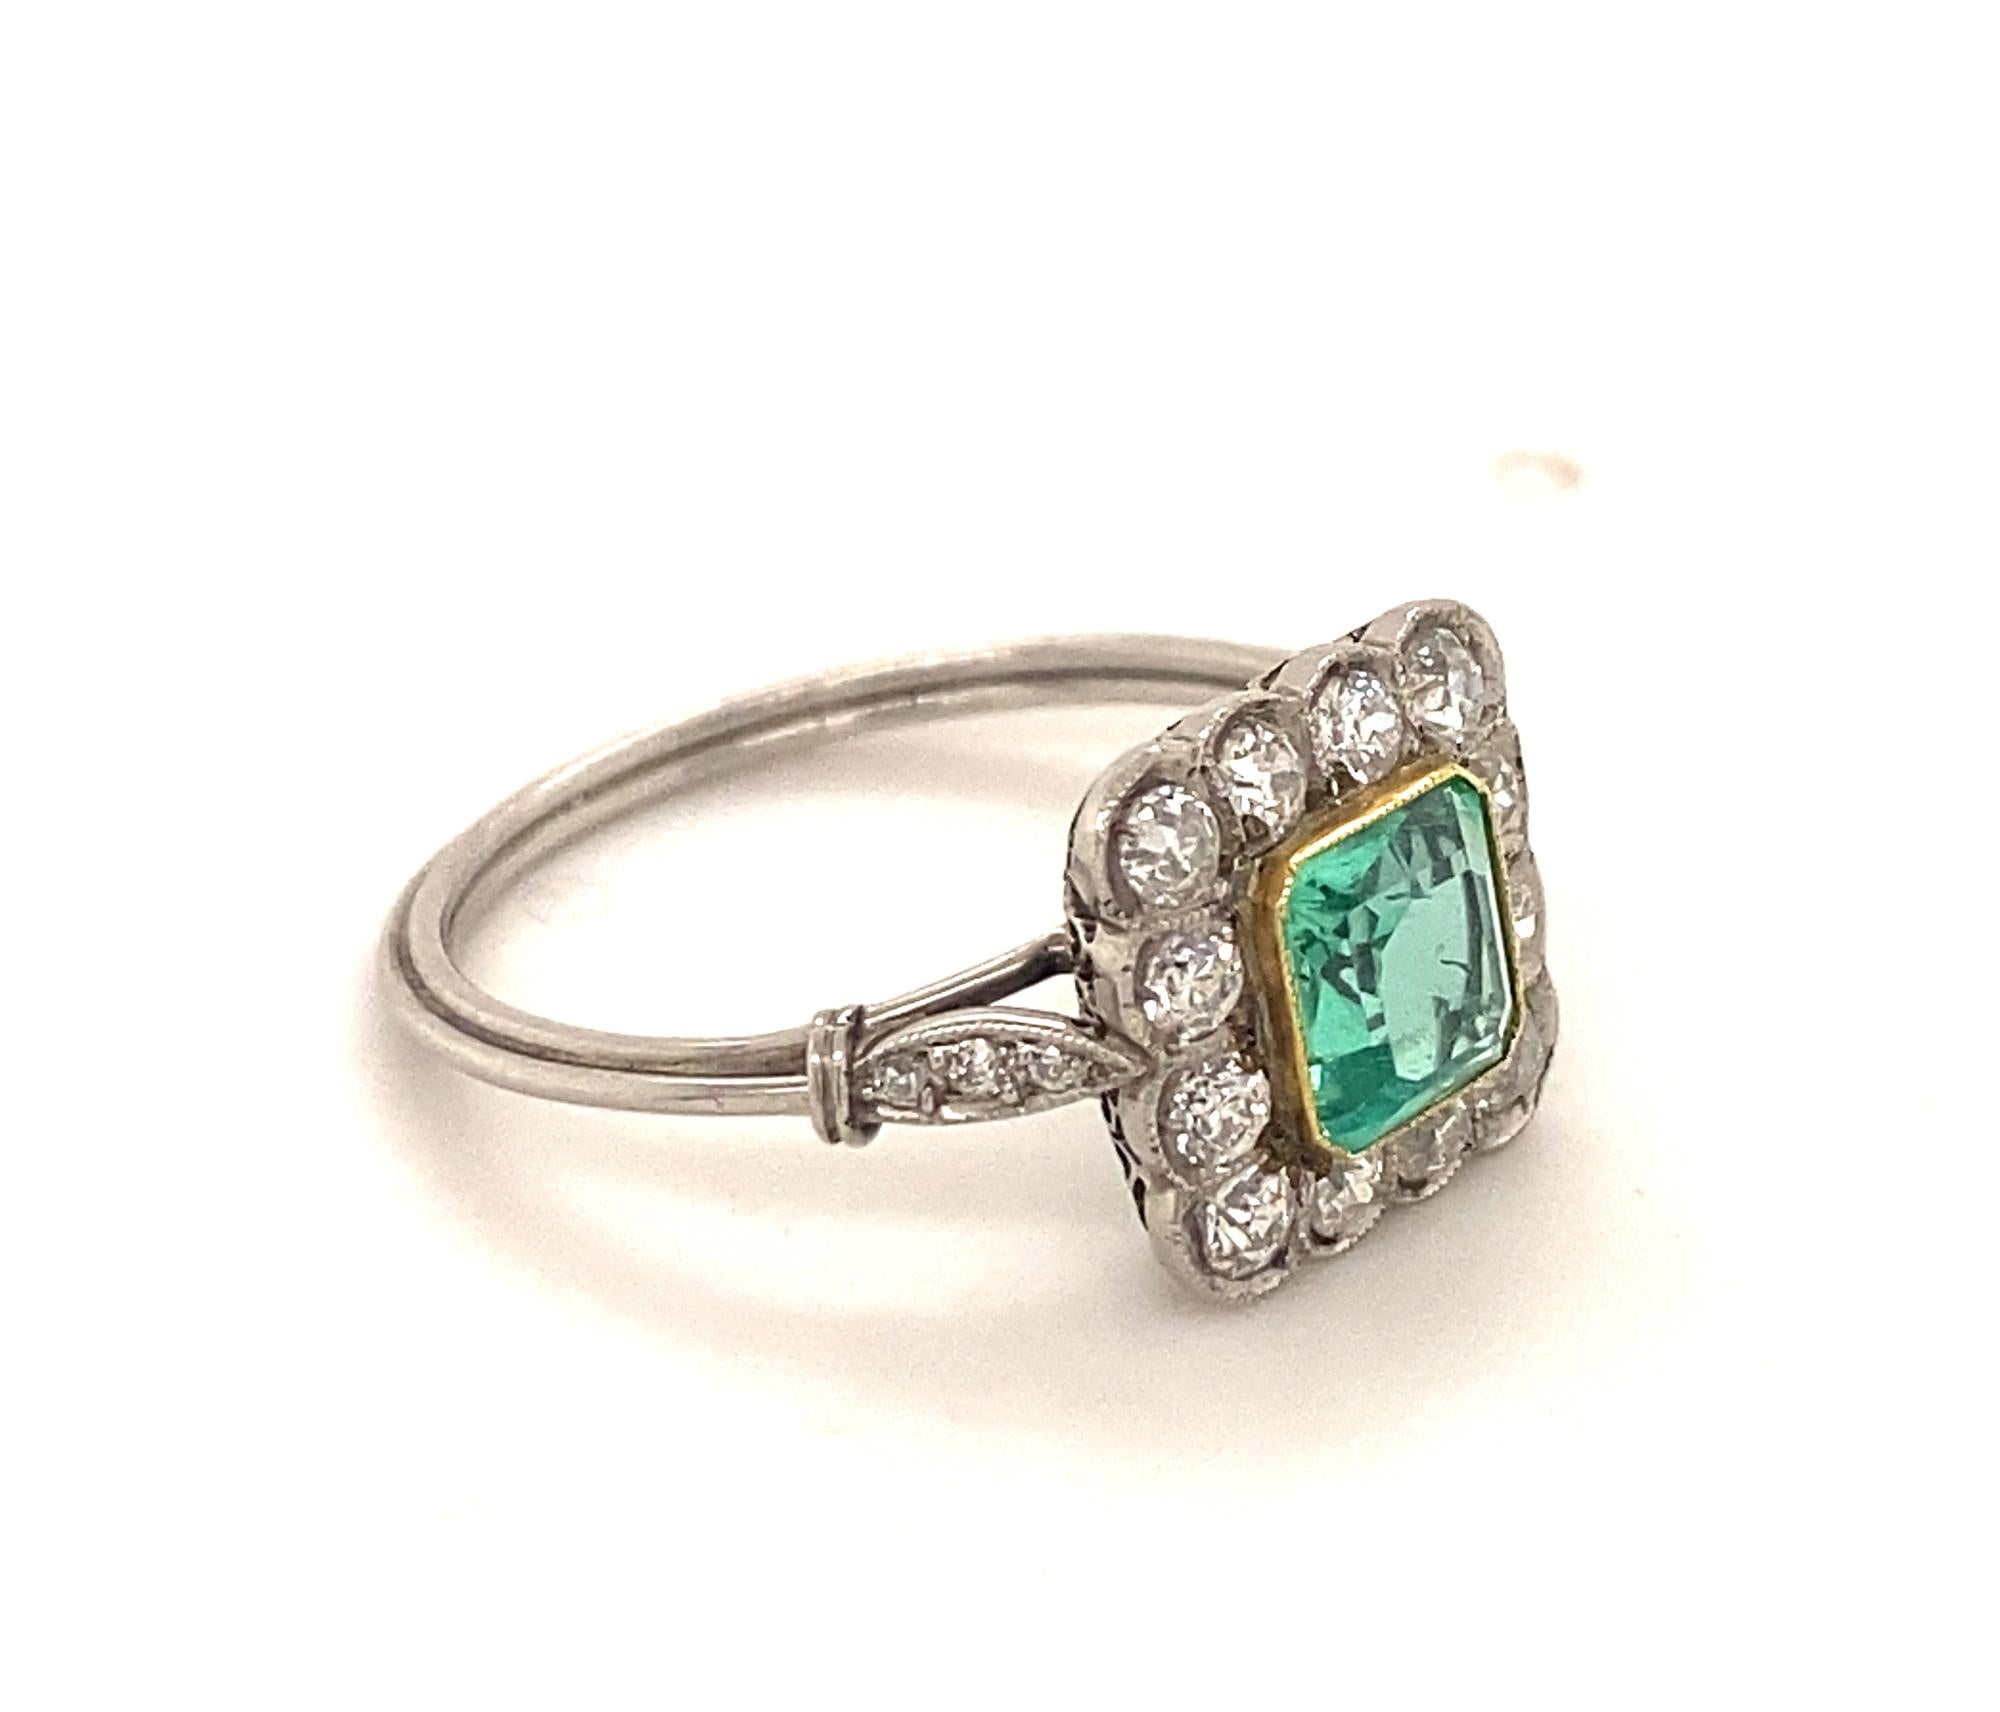 This is a beautiful art deco Style ring set with a stunning light green emerald old mine cut diamonds in platinum.  The gallery of the ring has an intricate filigree design the ring shank has a three rope like design.  The emerald is natural nice